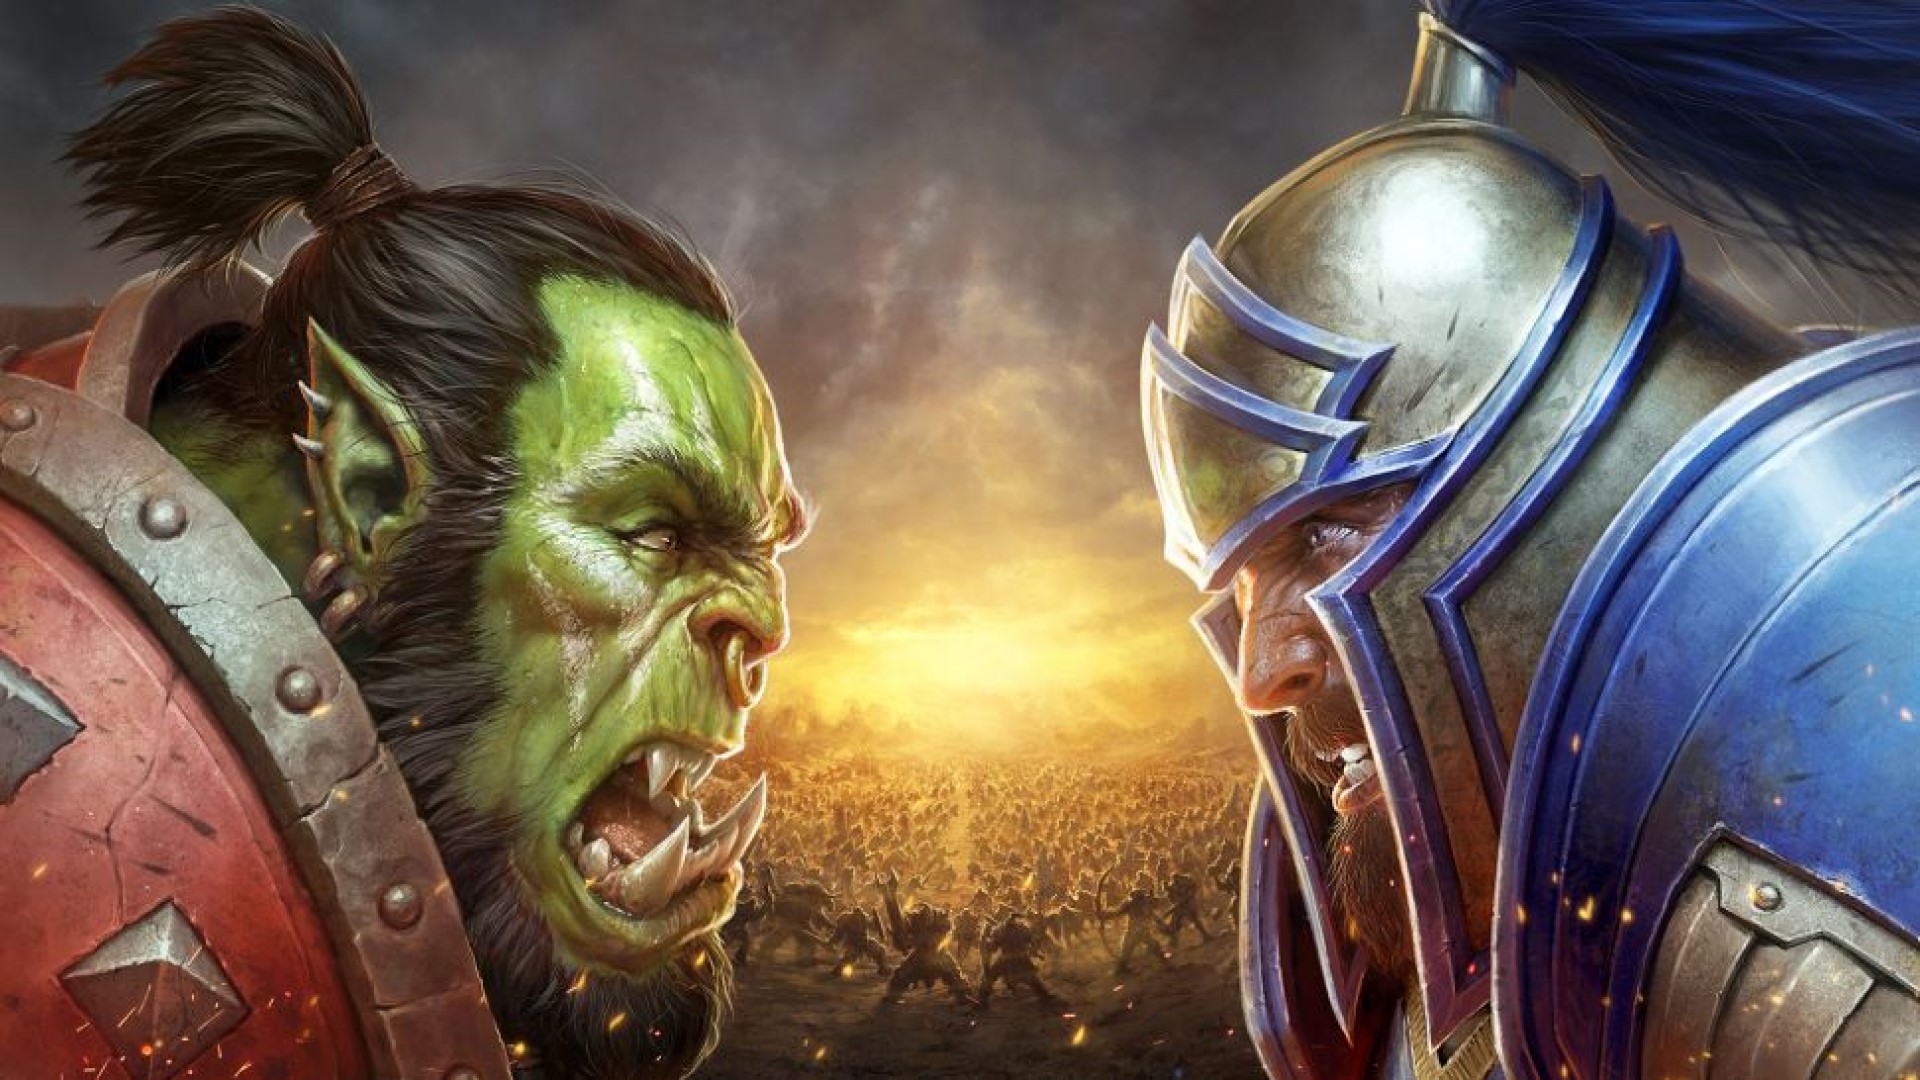 An orc and a human square off